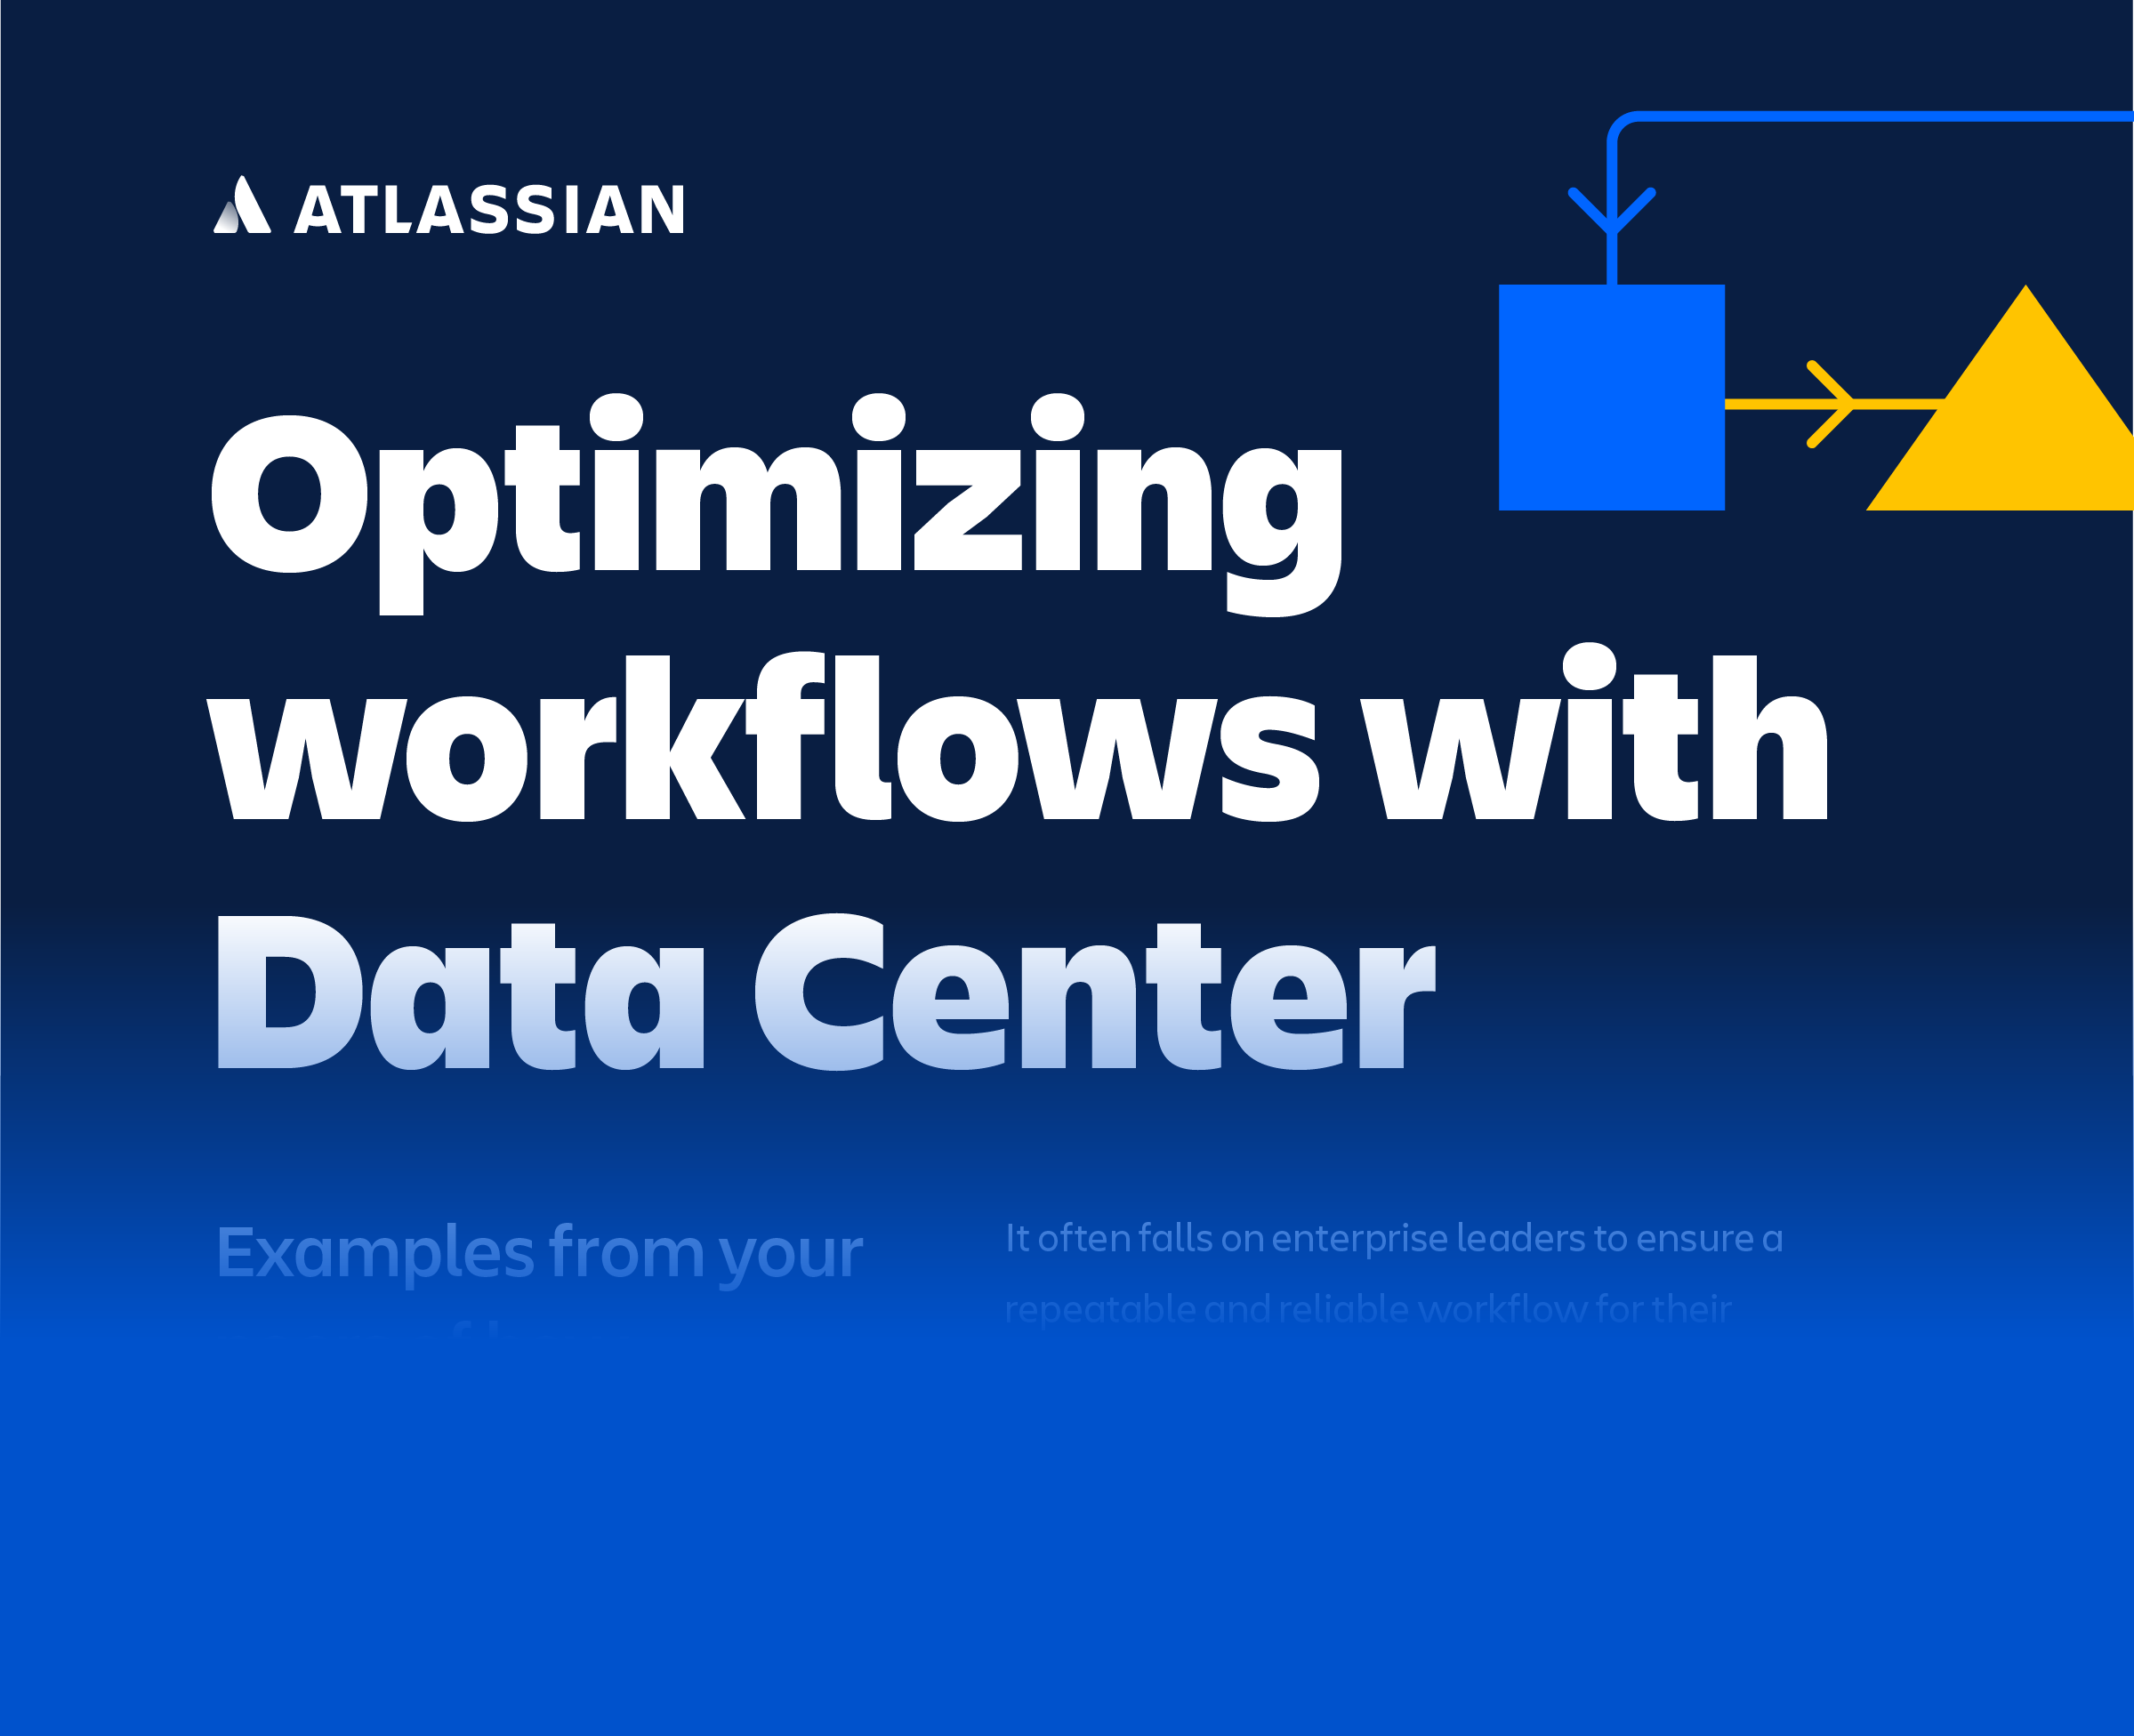 Optimizing workflows with Data Center